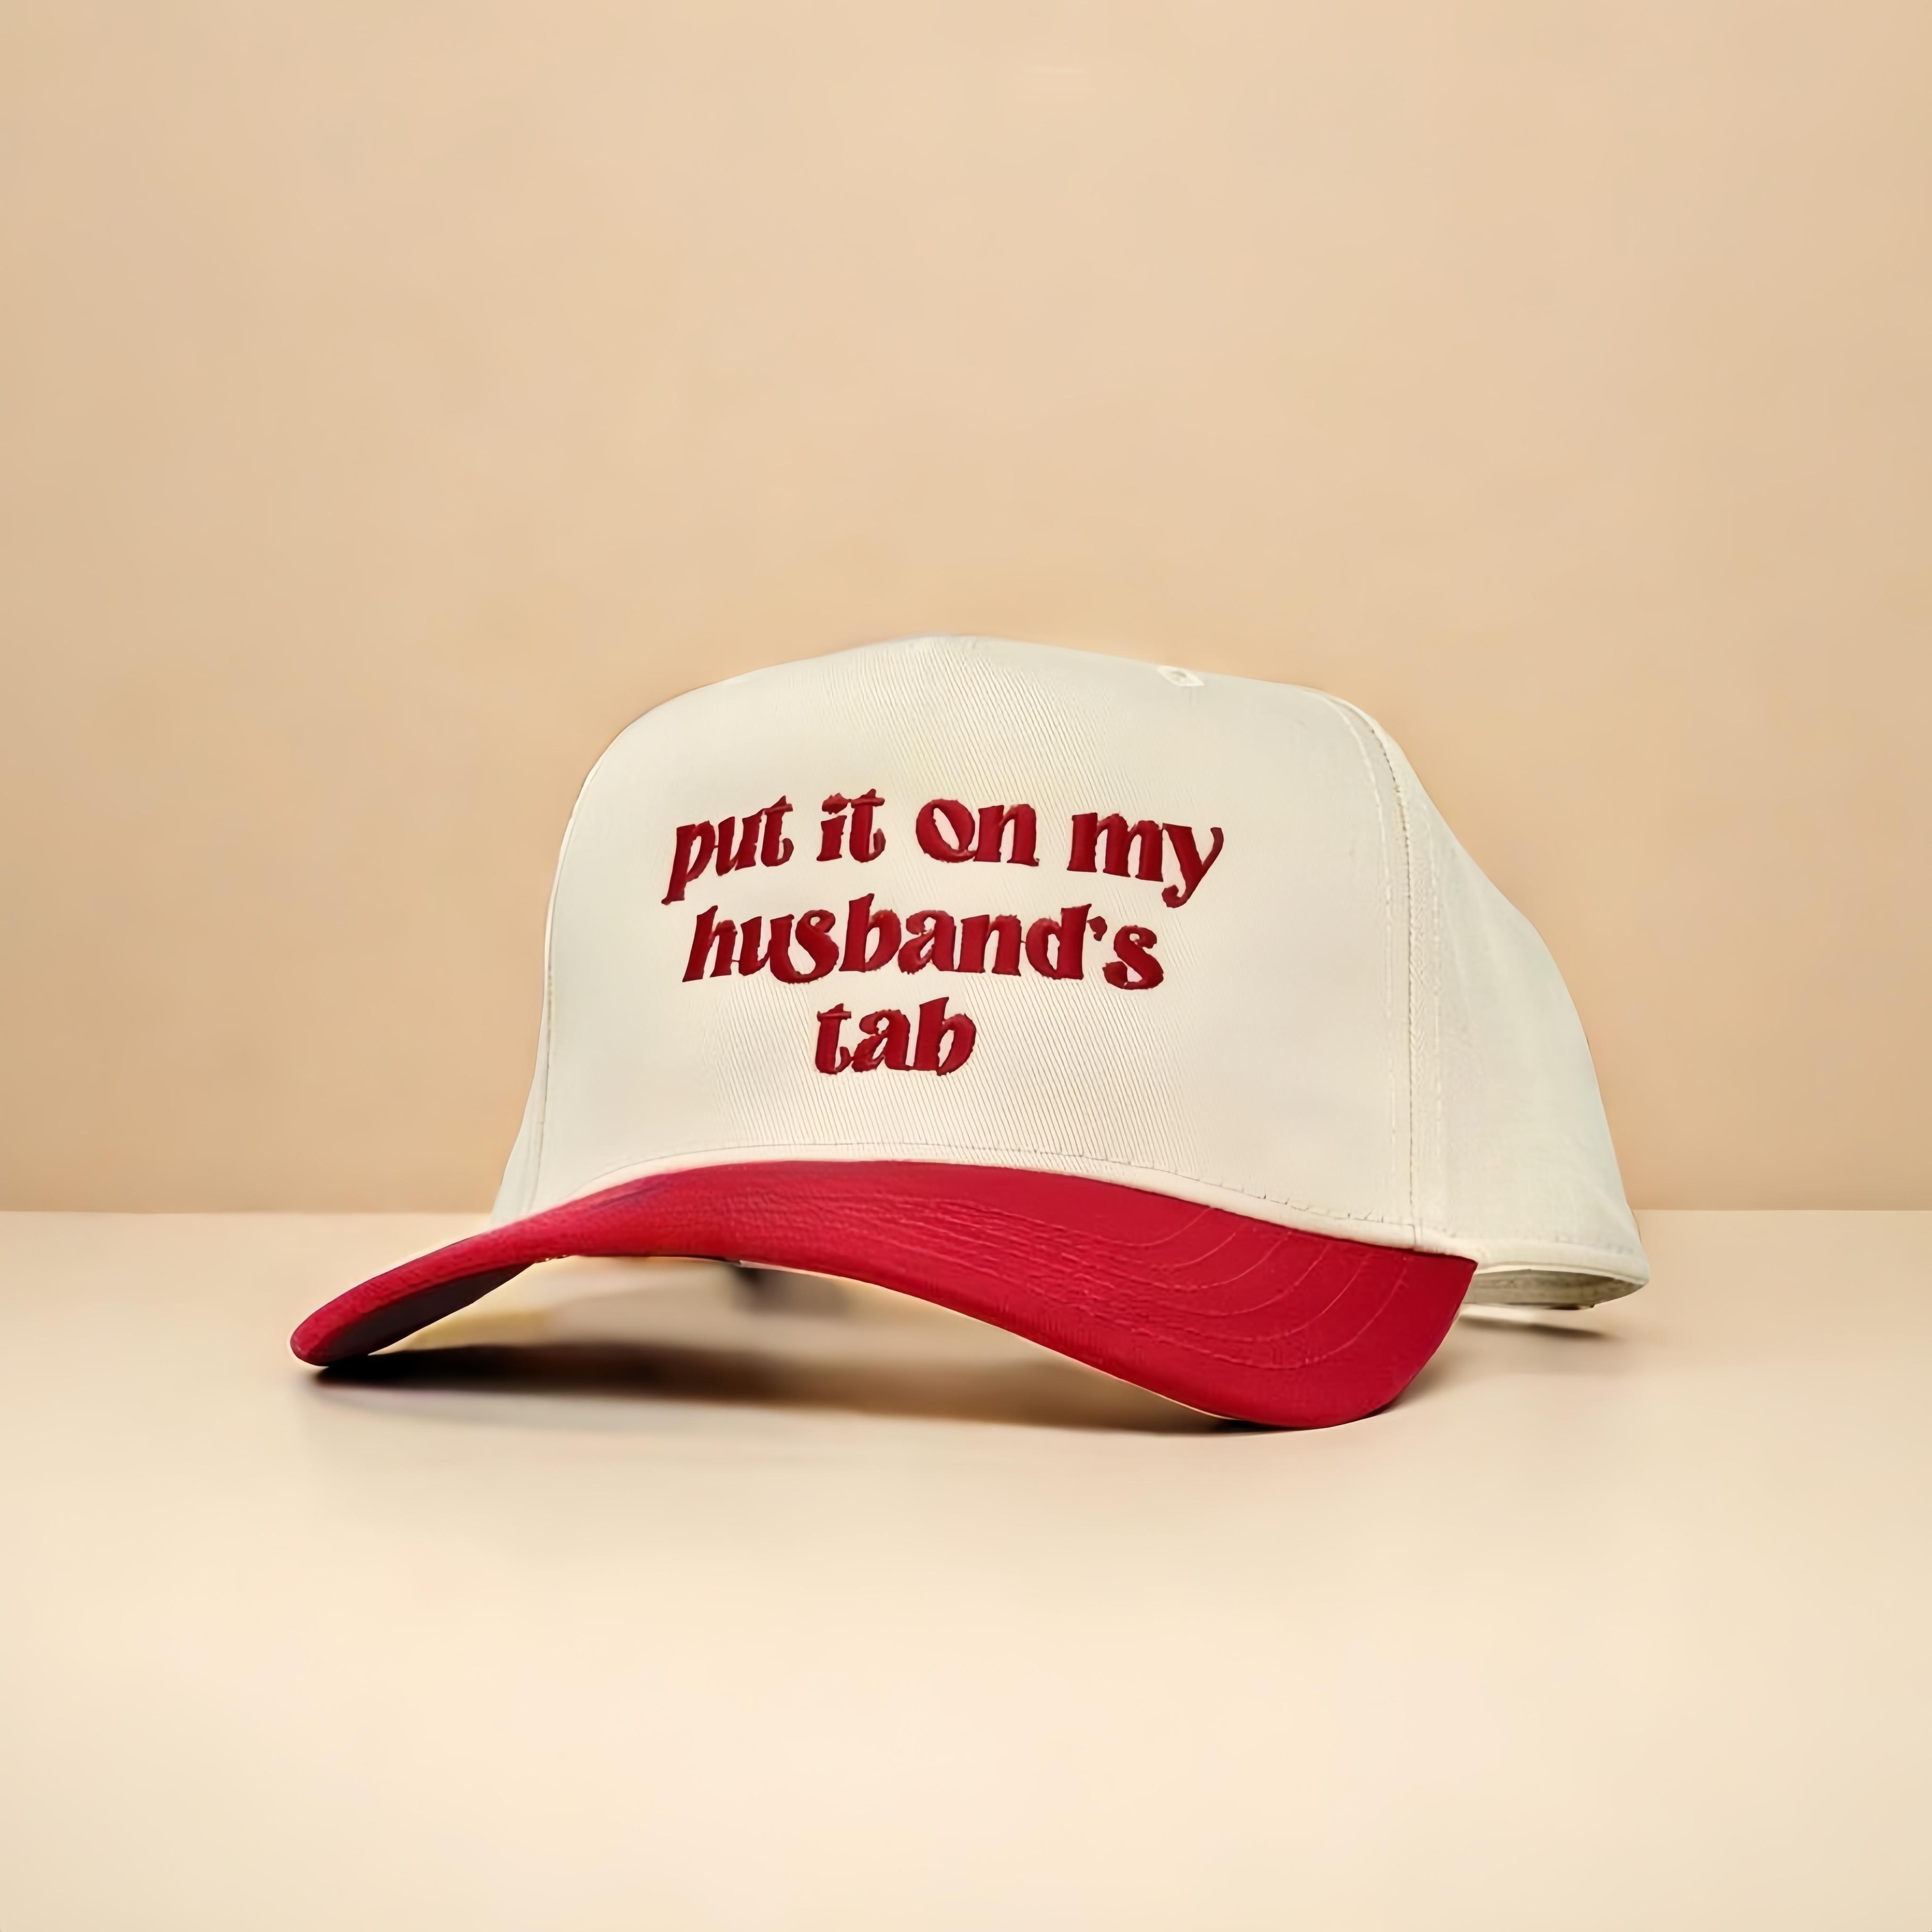 

Put It On My Husbands Tab-adultscaps Party Denim Baseball Caps, Dadhat Funny Hats For Menwomen